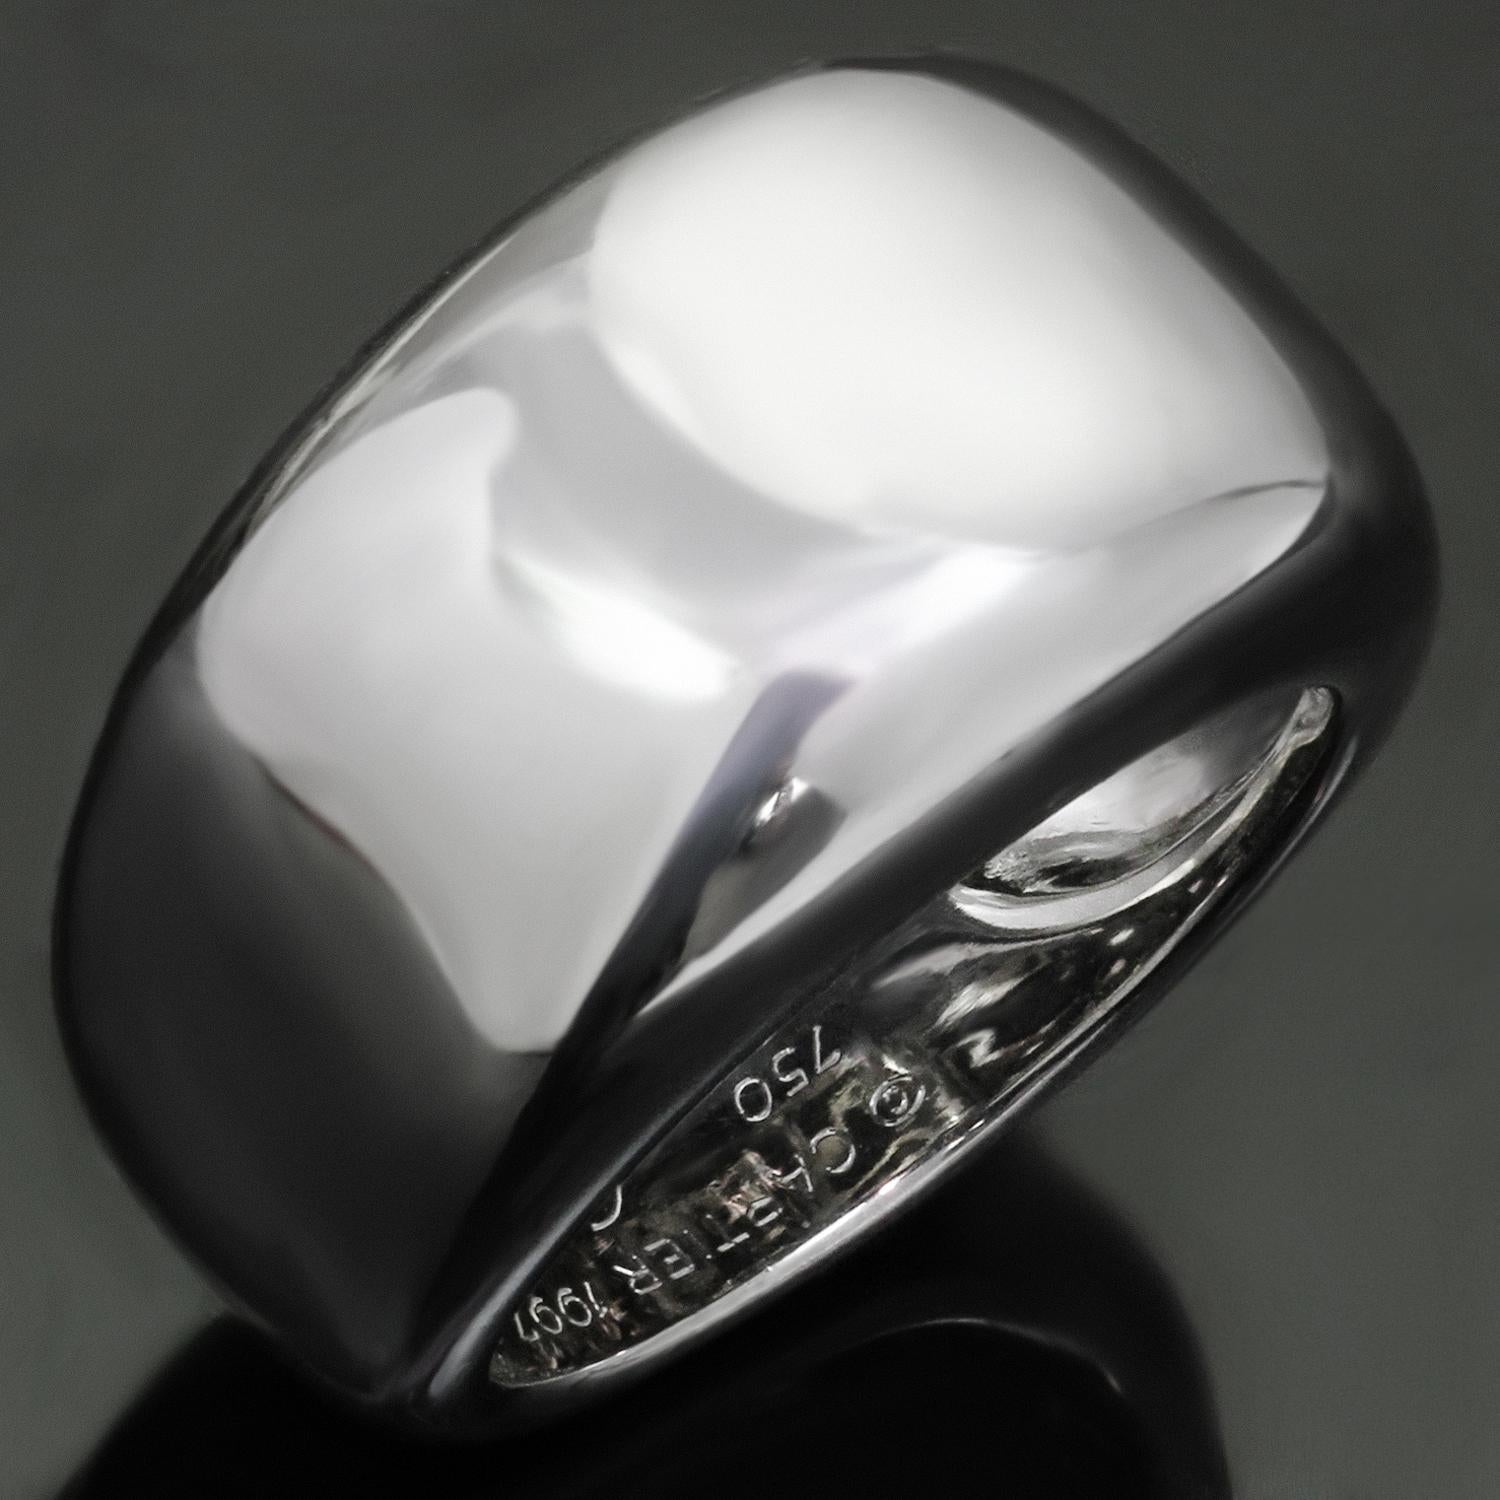 This classic Cartier ring from the Nouvelle Vague collection features a wide band design crafted in 18k white gold. Made in France circa 1997. Measurements: 0.55